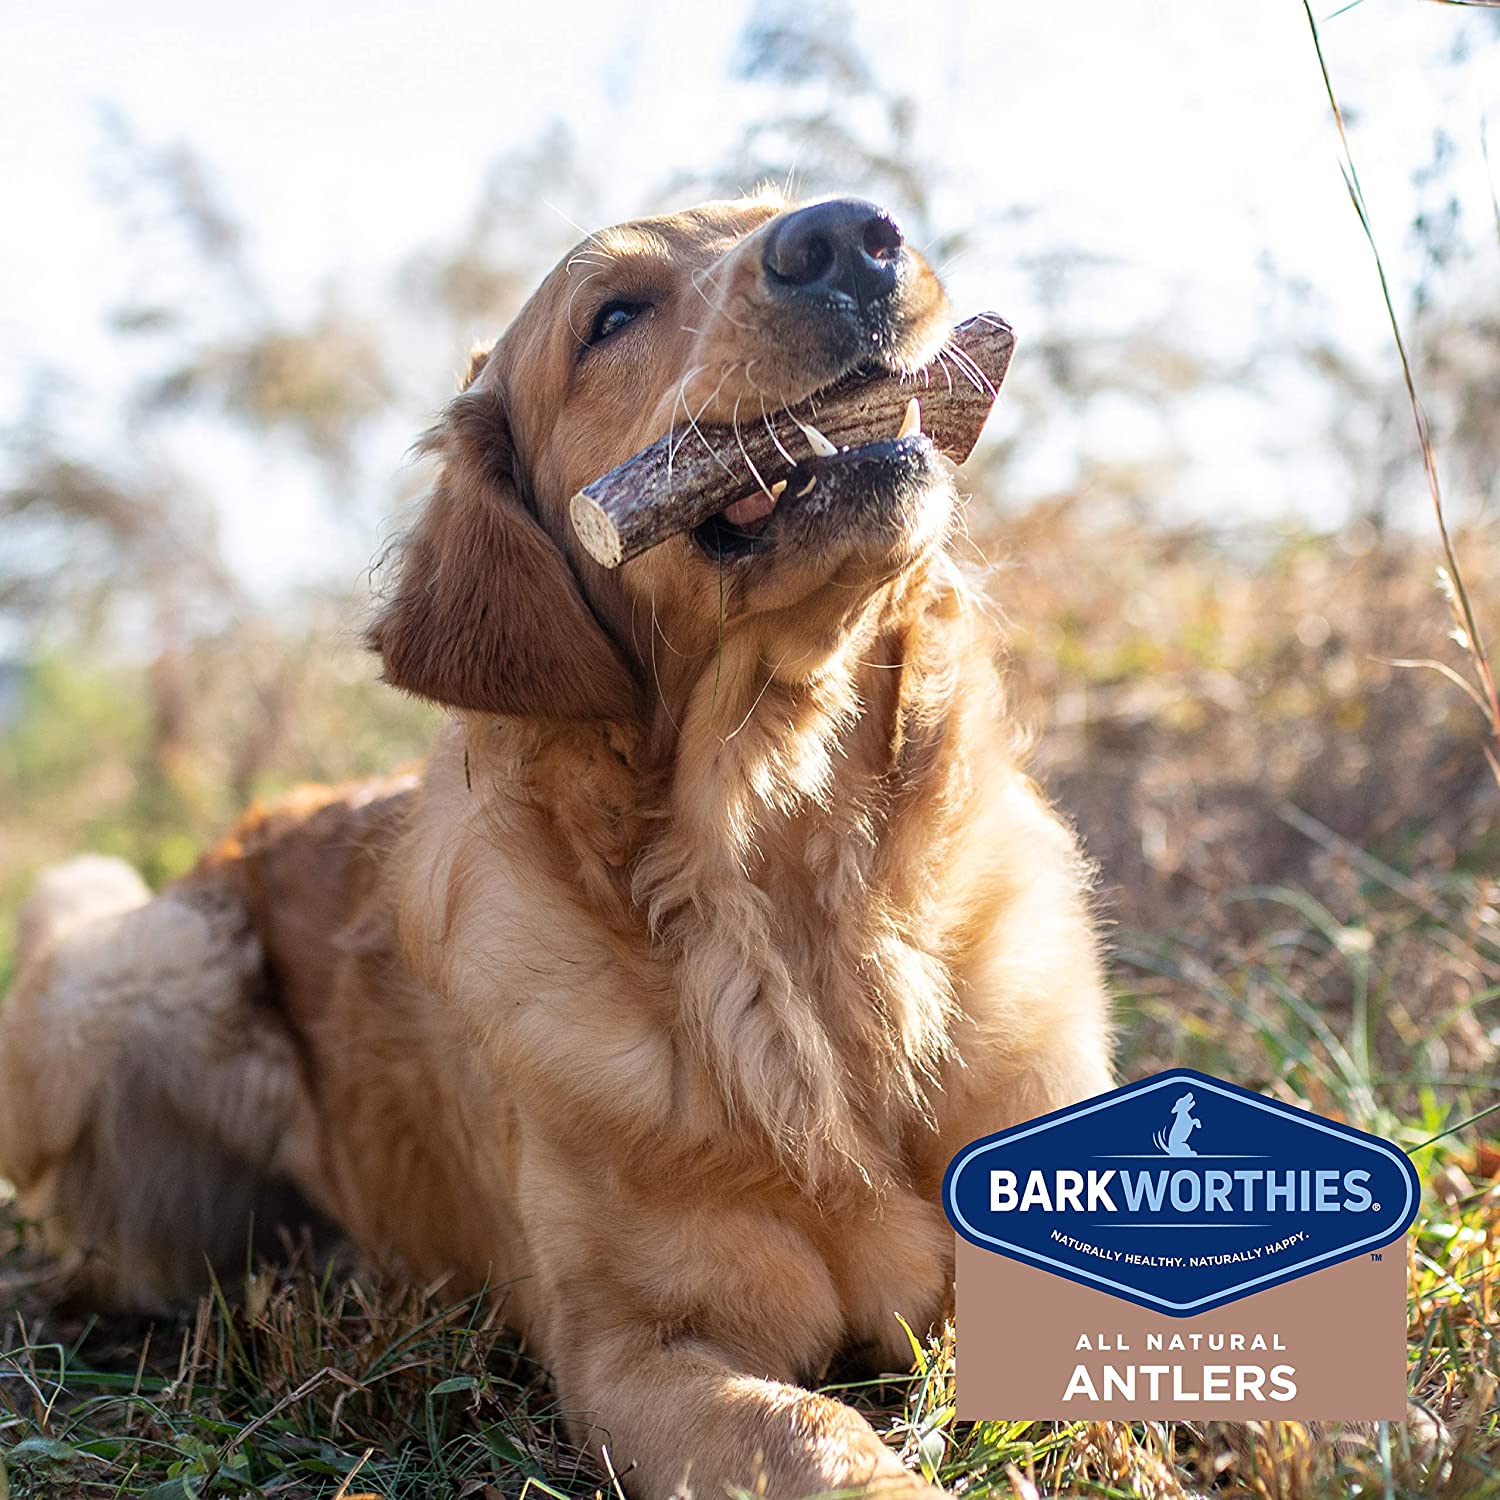 Barkworthies Hand Selected, Naturally Shed Split & Whole Elk Antlers - Premium Long Lasting, Odor Free Dog Chews for All Dog Sizes and Breeds - No Chemical Treatments, No Added Preservatives